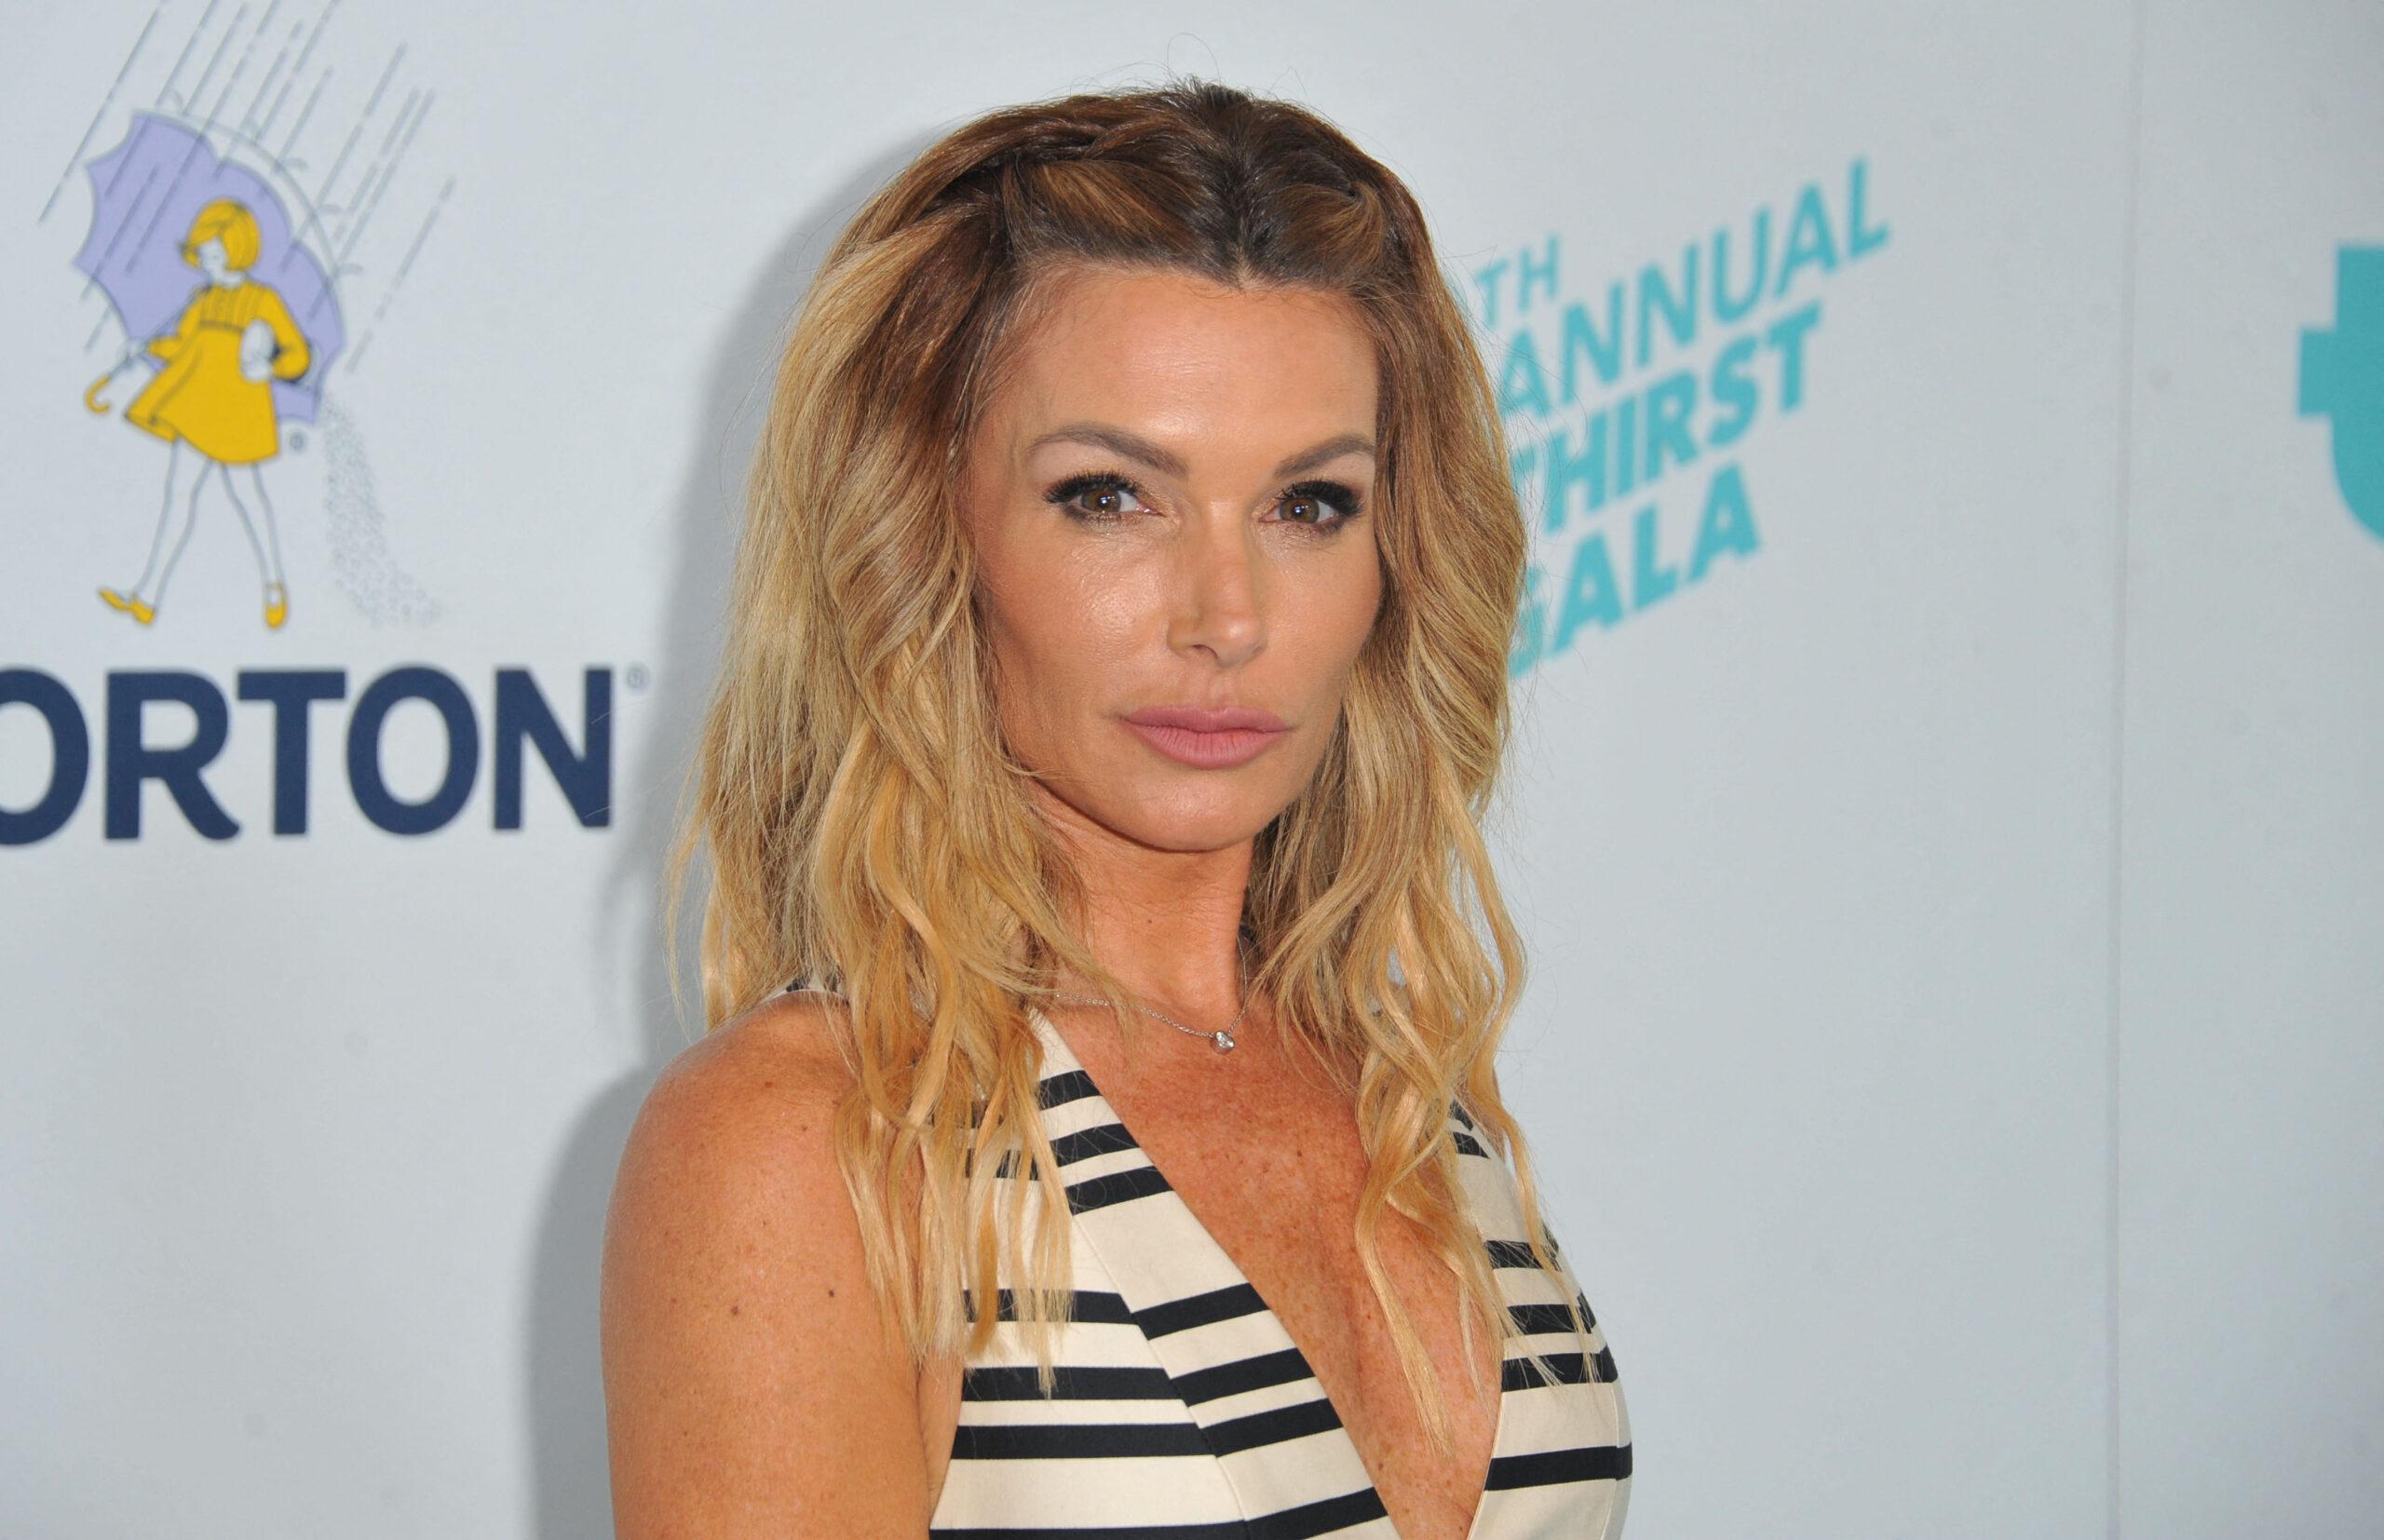 RHOBH Star Eden Sasson Sued Over Alleged 'Vicious' Dog Attack That Caused 'Permanent Disability'